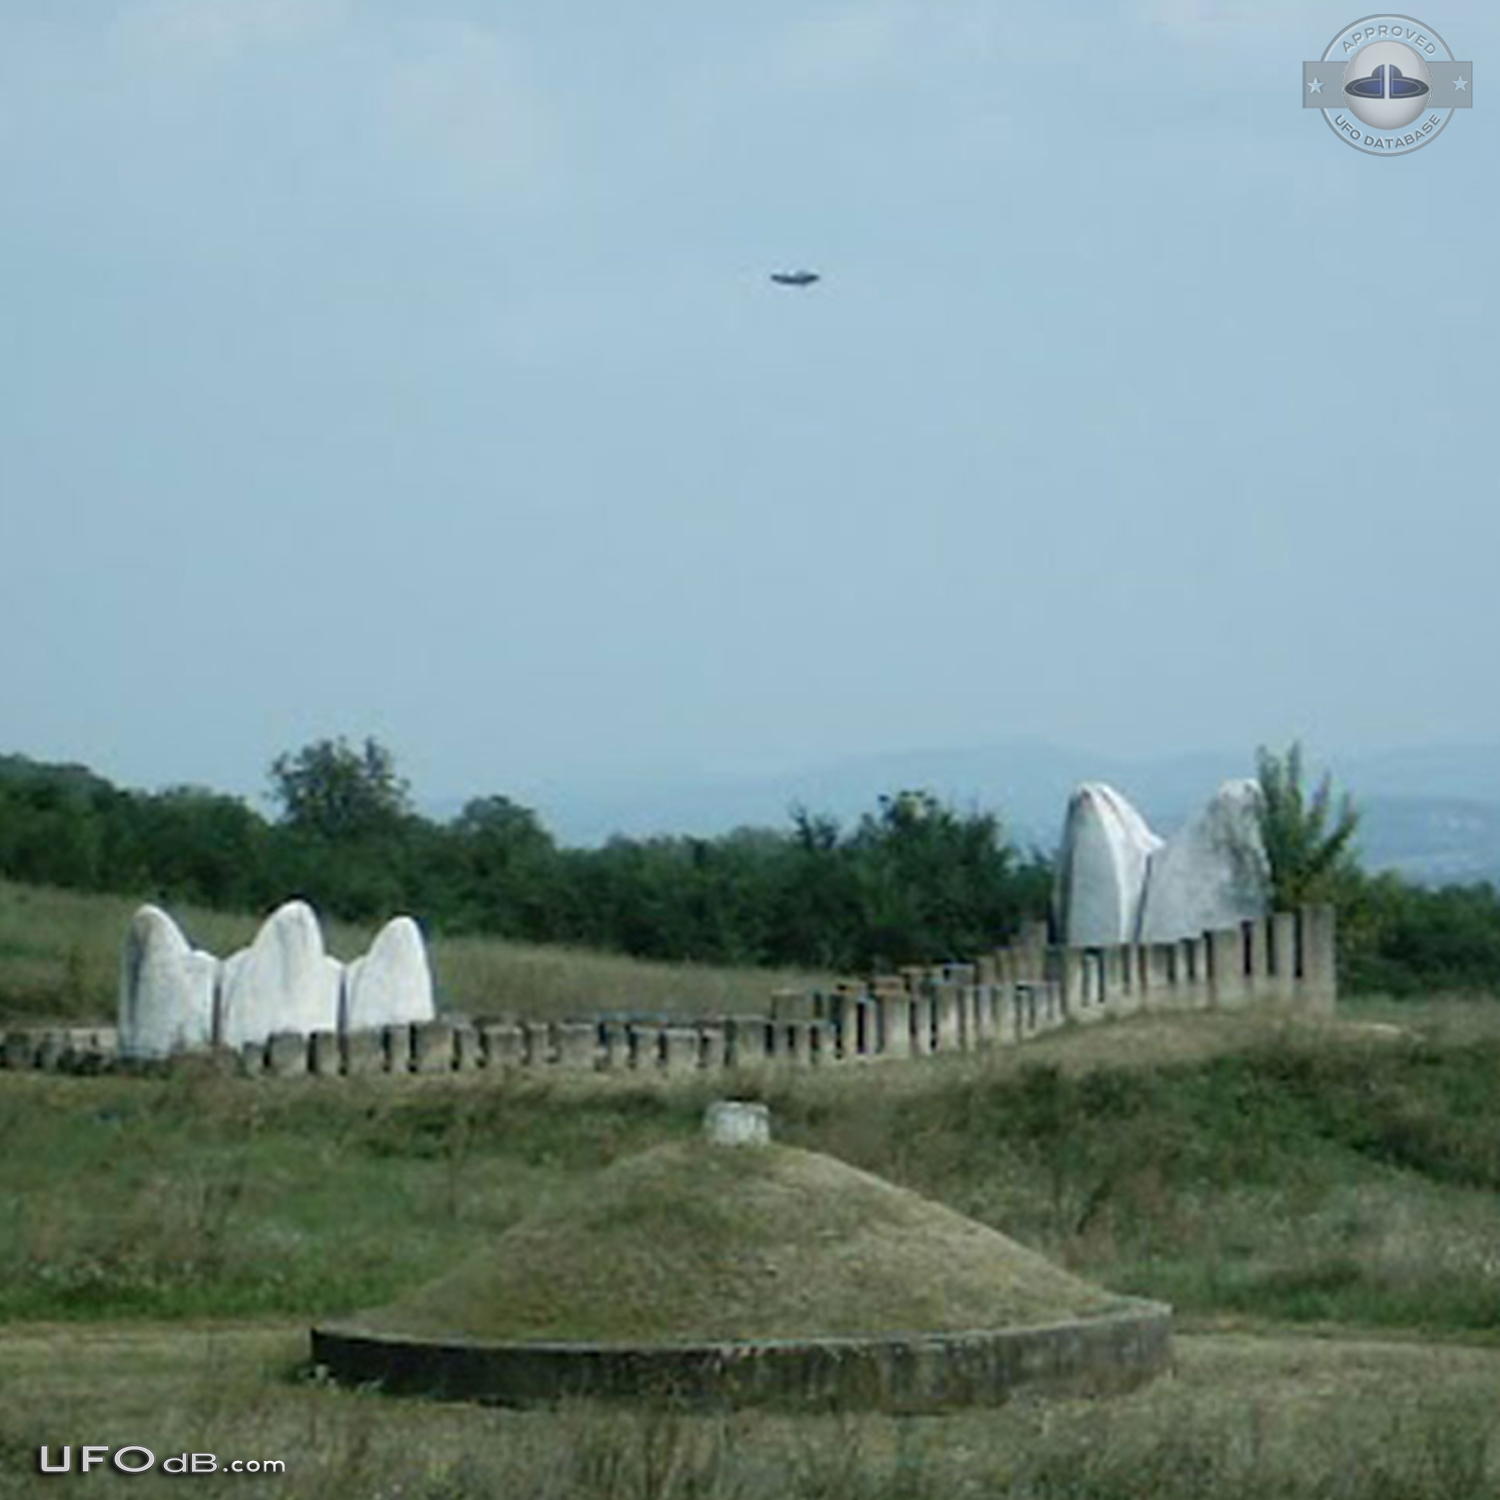 Monument picture reveals passing saucer UFO in Kragujevac, Serbia 2004 UFO Picture #457-3